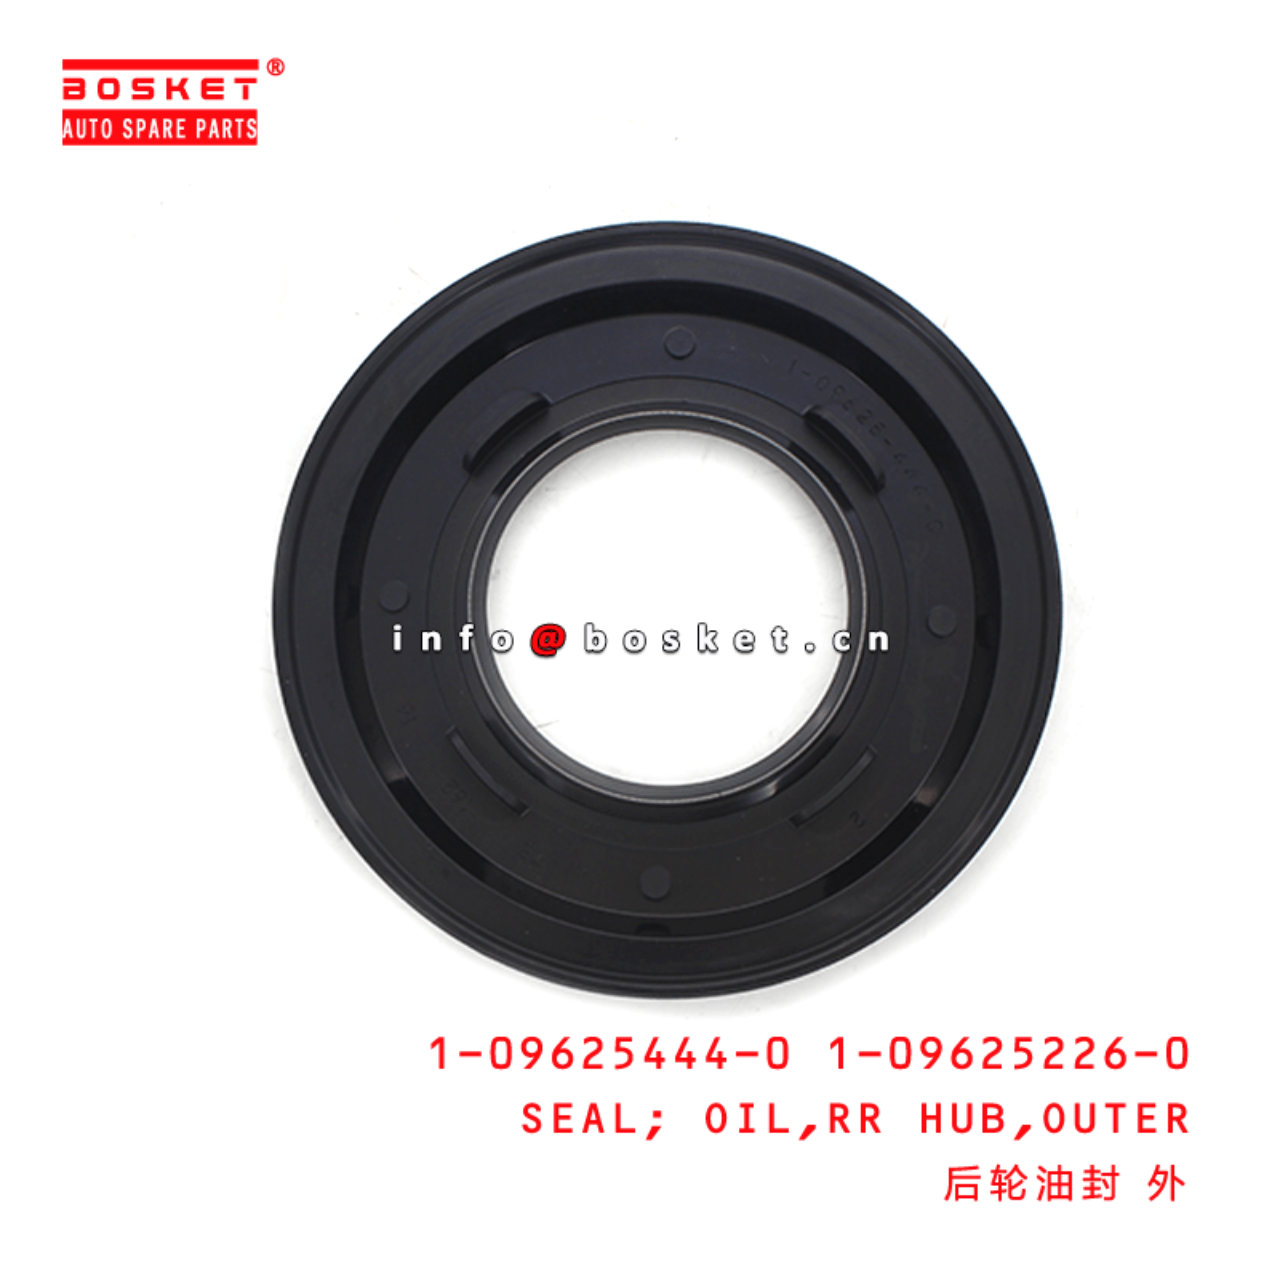 1-09625444-0 1-09625226-0 Outer Rear Hub Oil Seal 1096254440 